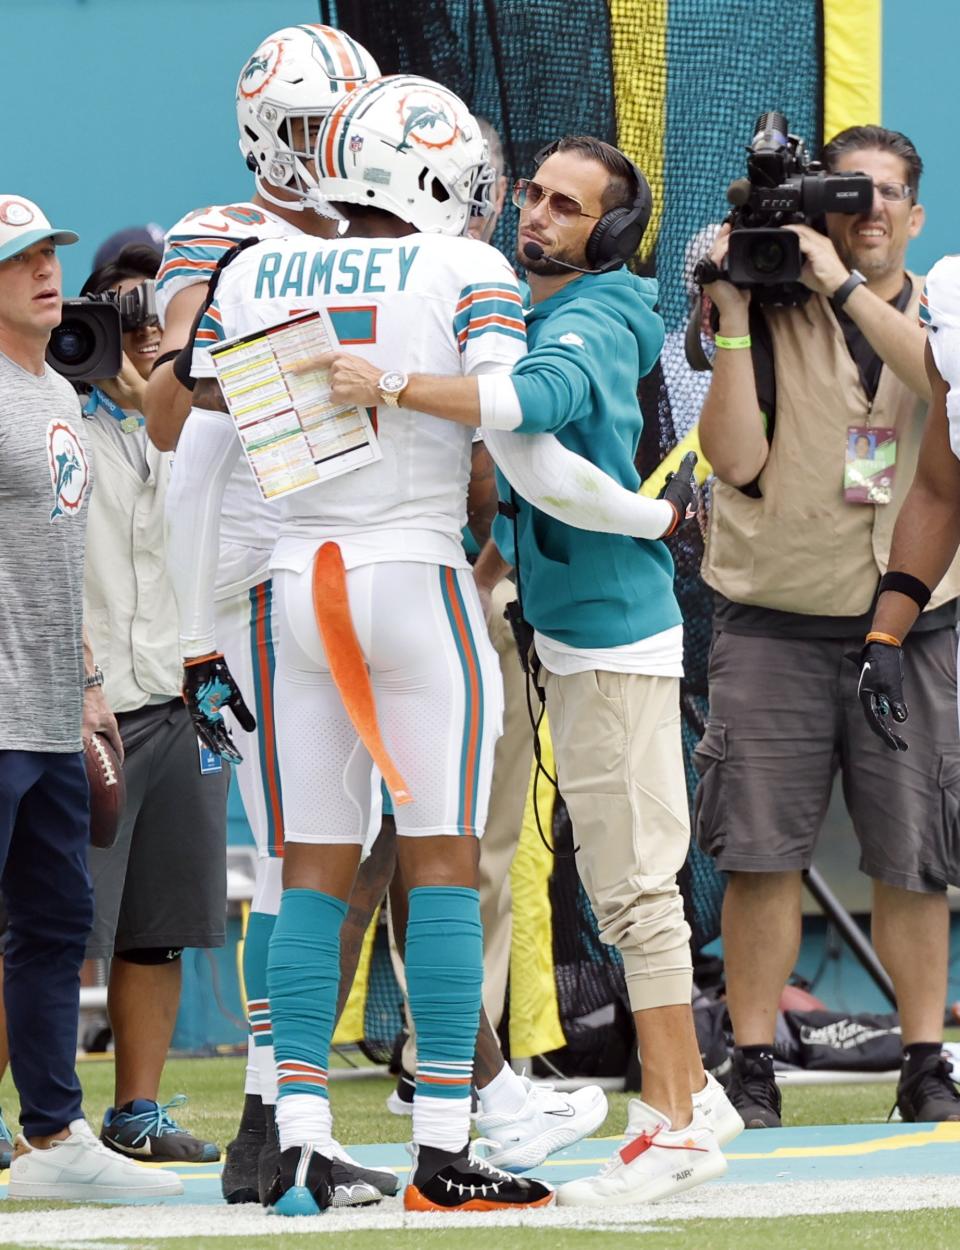 Miami Dolphins coach Mike McDaniel, center right, congratulates Jalen Ramsey, center left, on his interception in the second quarter of an NFL football game against the New England Patriots in Miami Gardens, Fla., Sunday, Oct. 29, 2023. (Al Diaz/Miami Herald via AP)